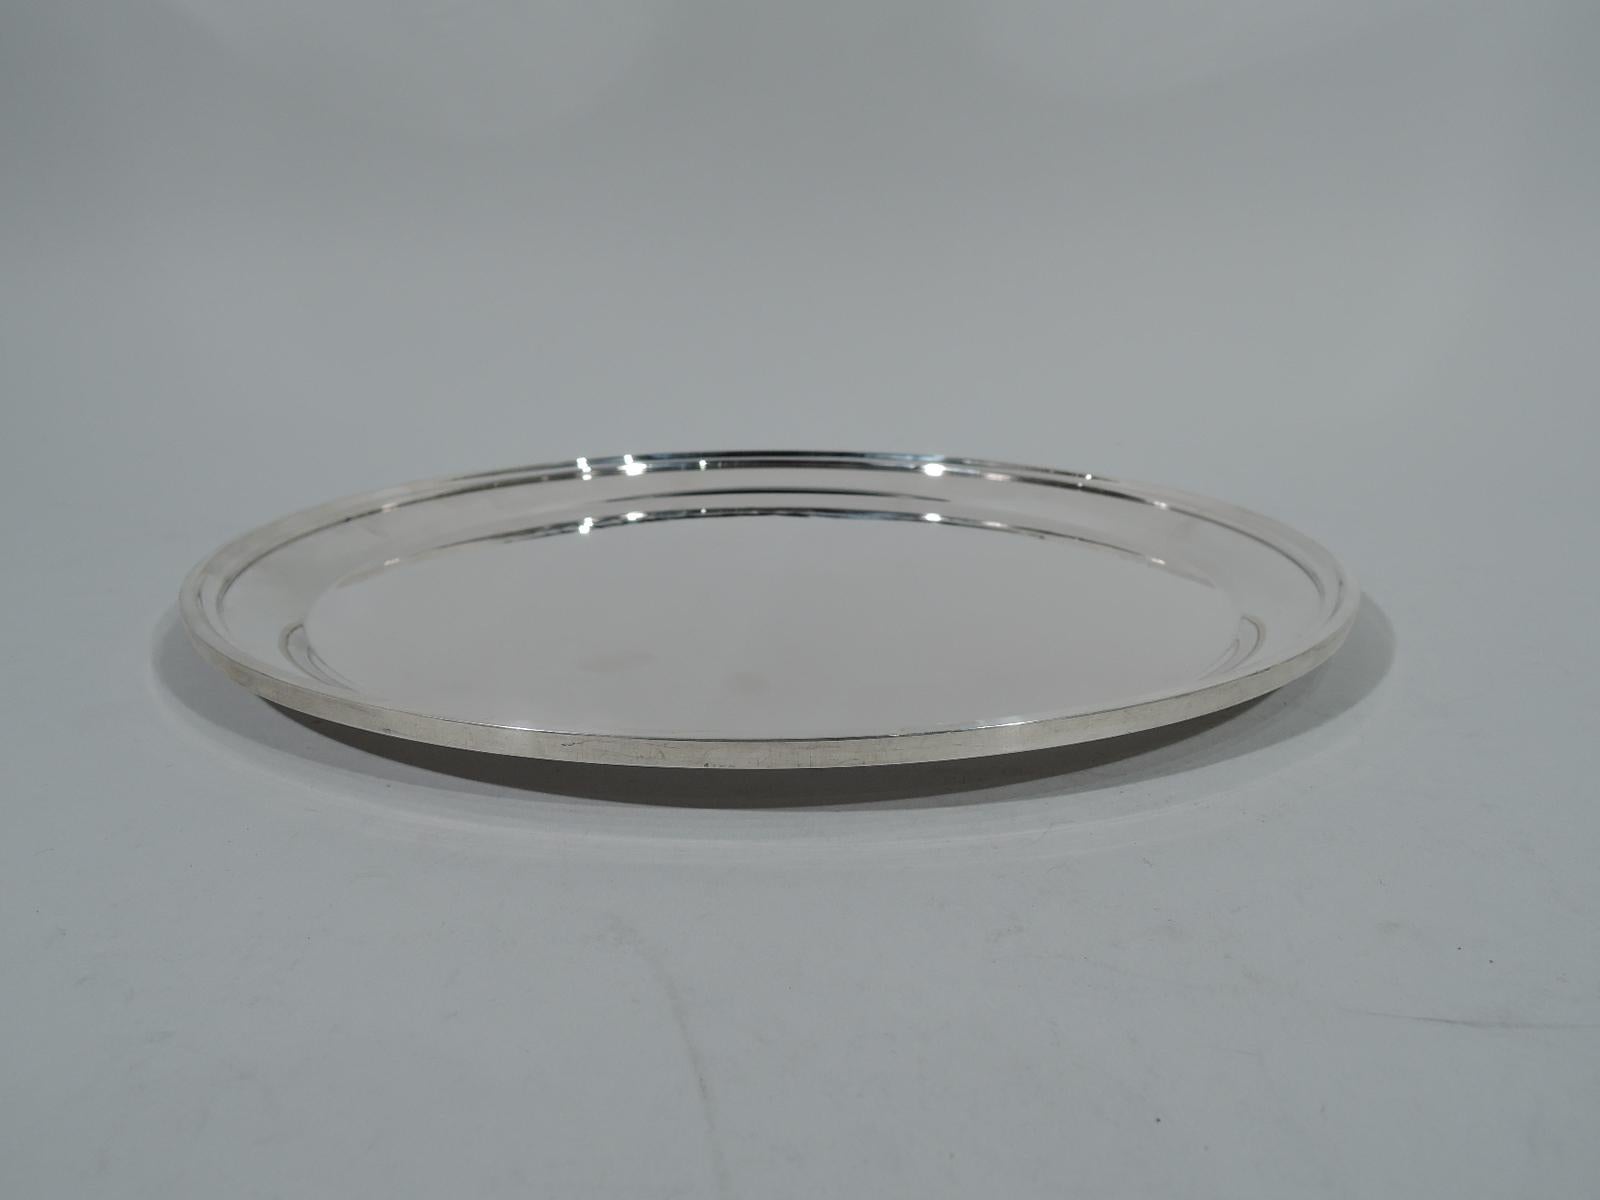 Plain and practical sterling silver serving tray. Made by S. Kirk & Son in Baltimore. Circular with tapering sides and molded rim. Hallmark (1932-61) and no. 4112. Weight: 23 troy ounces.